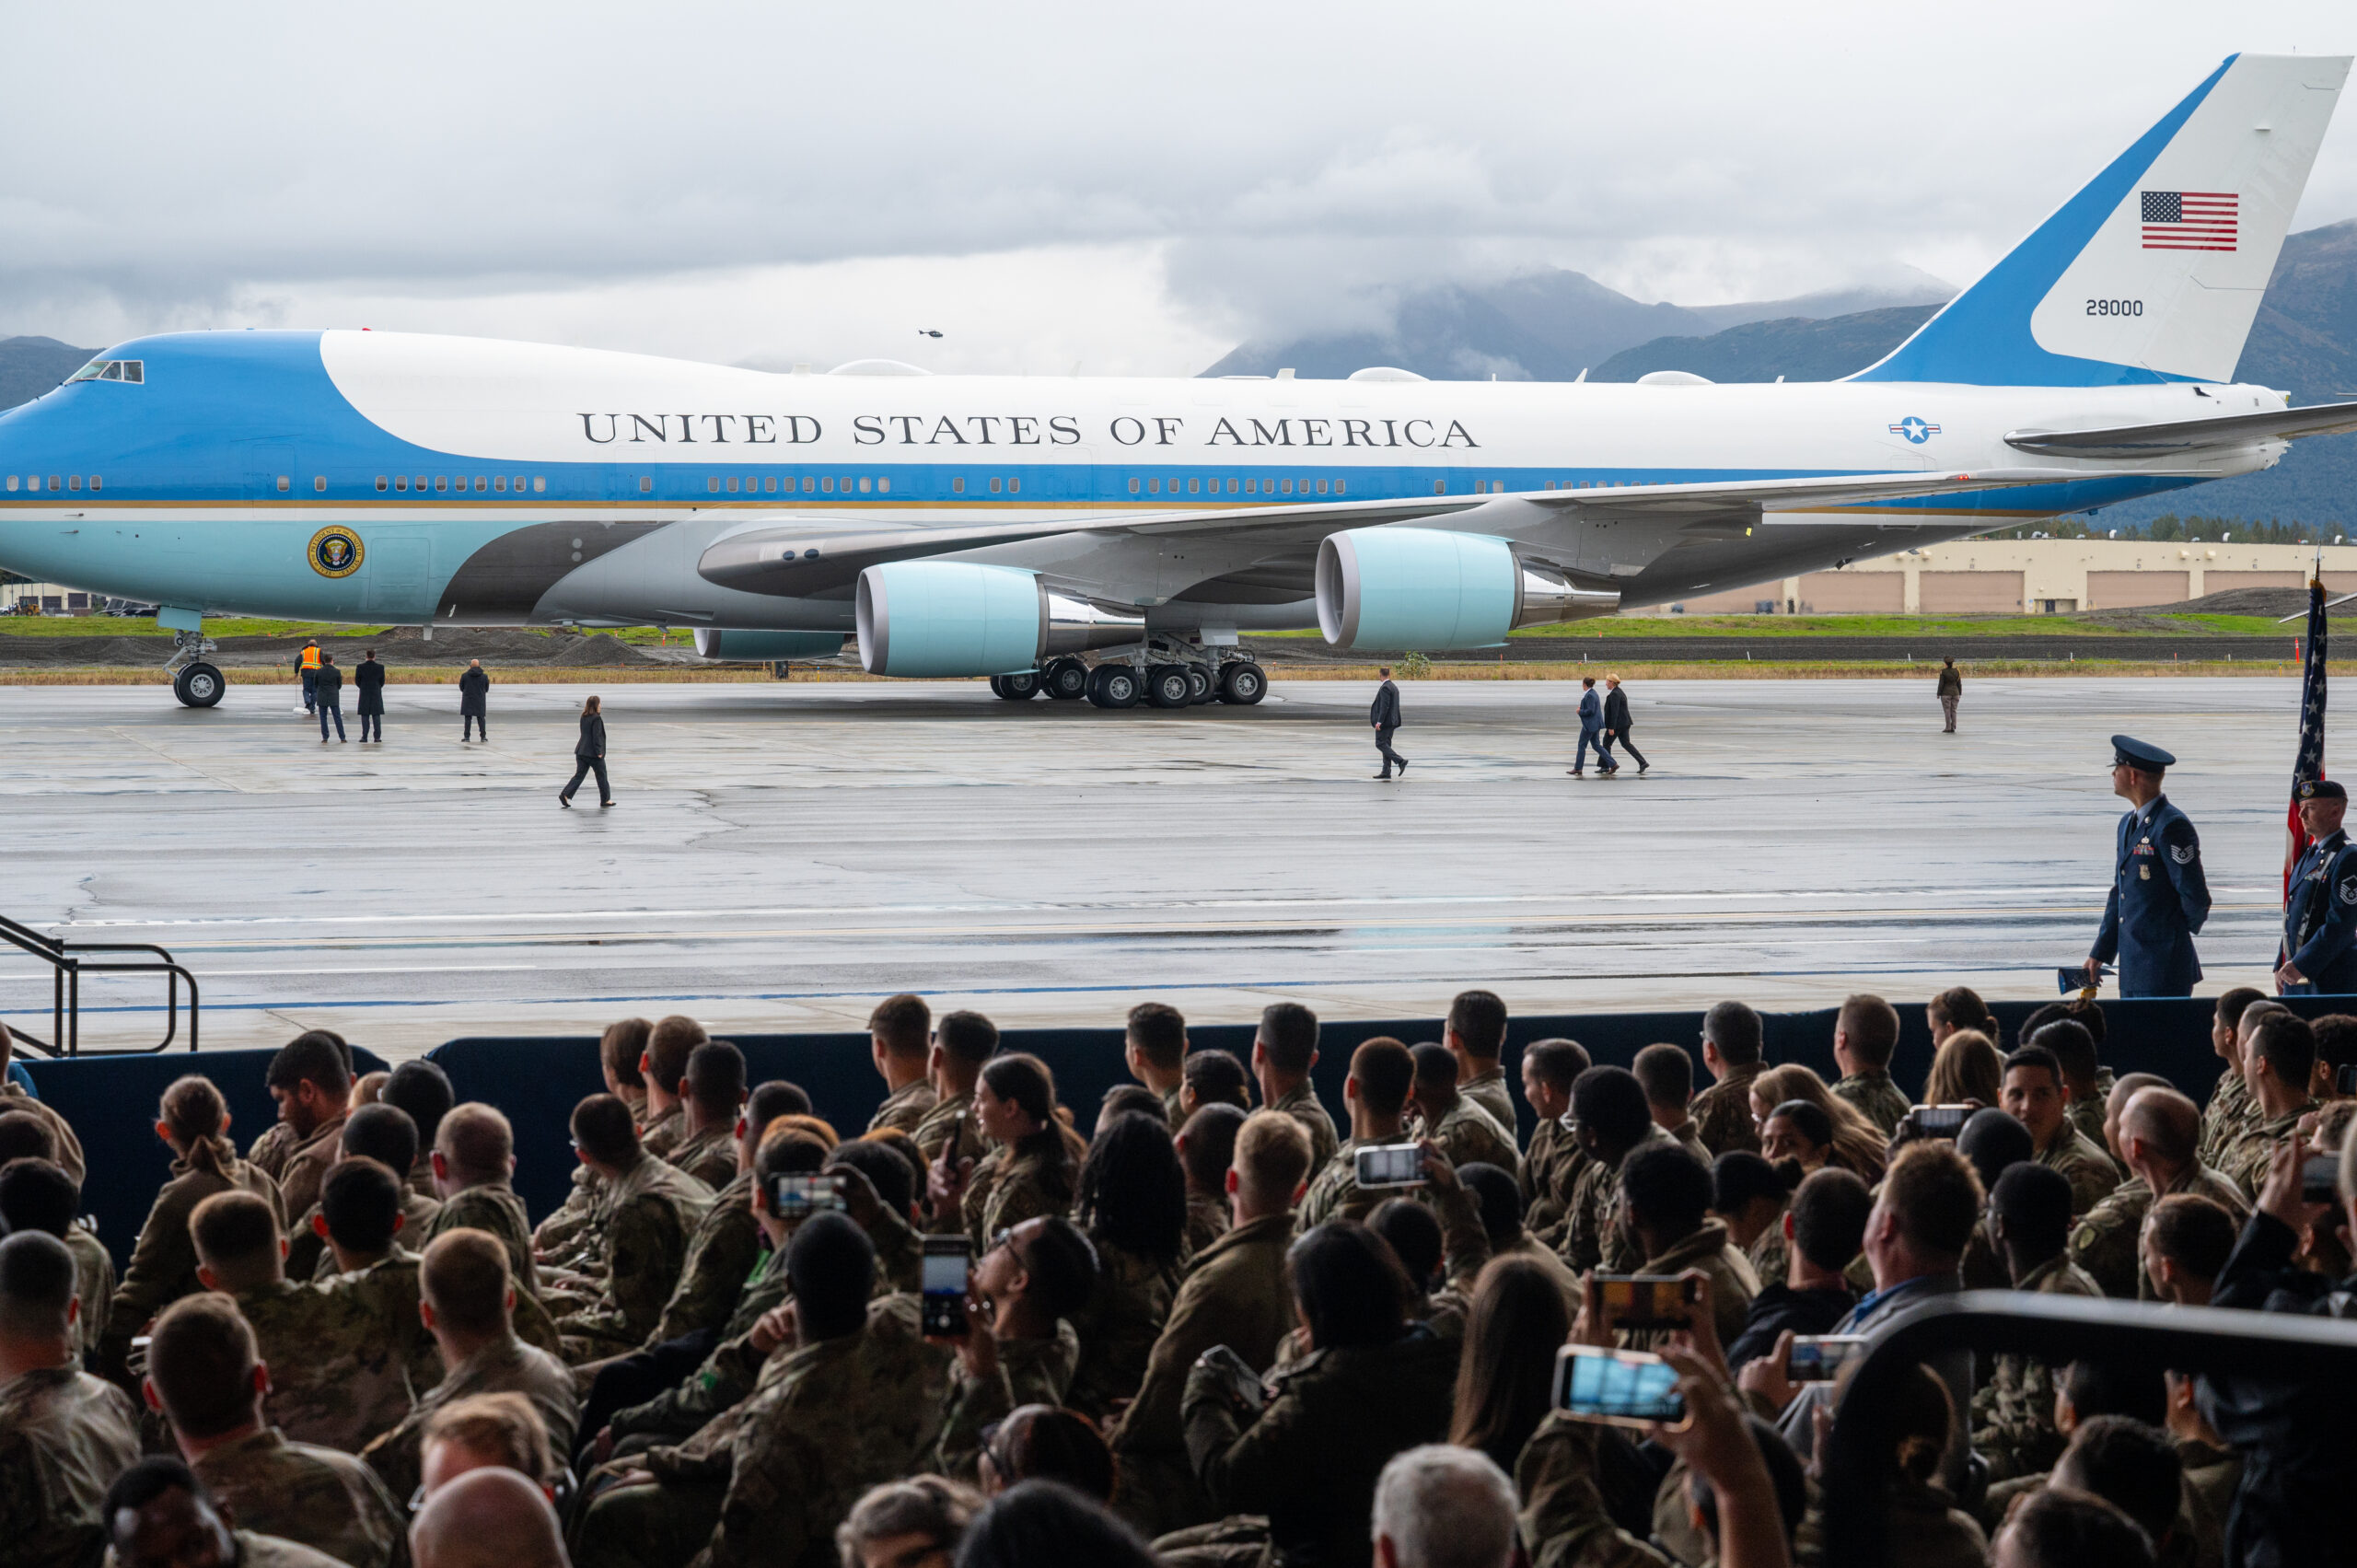 Air Force One on a tarmac as a group of people look on, some taking photos on their cellphones